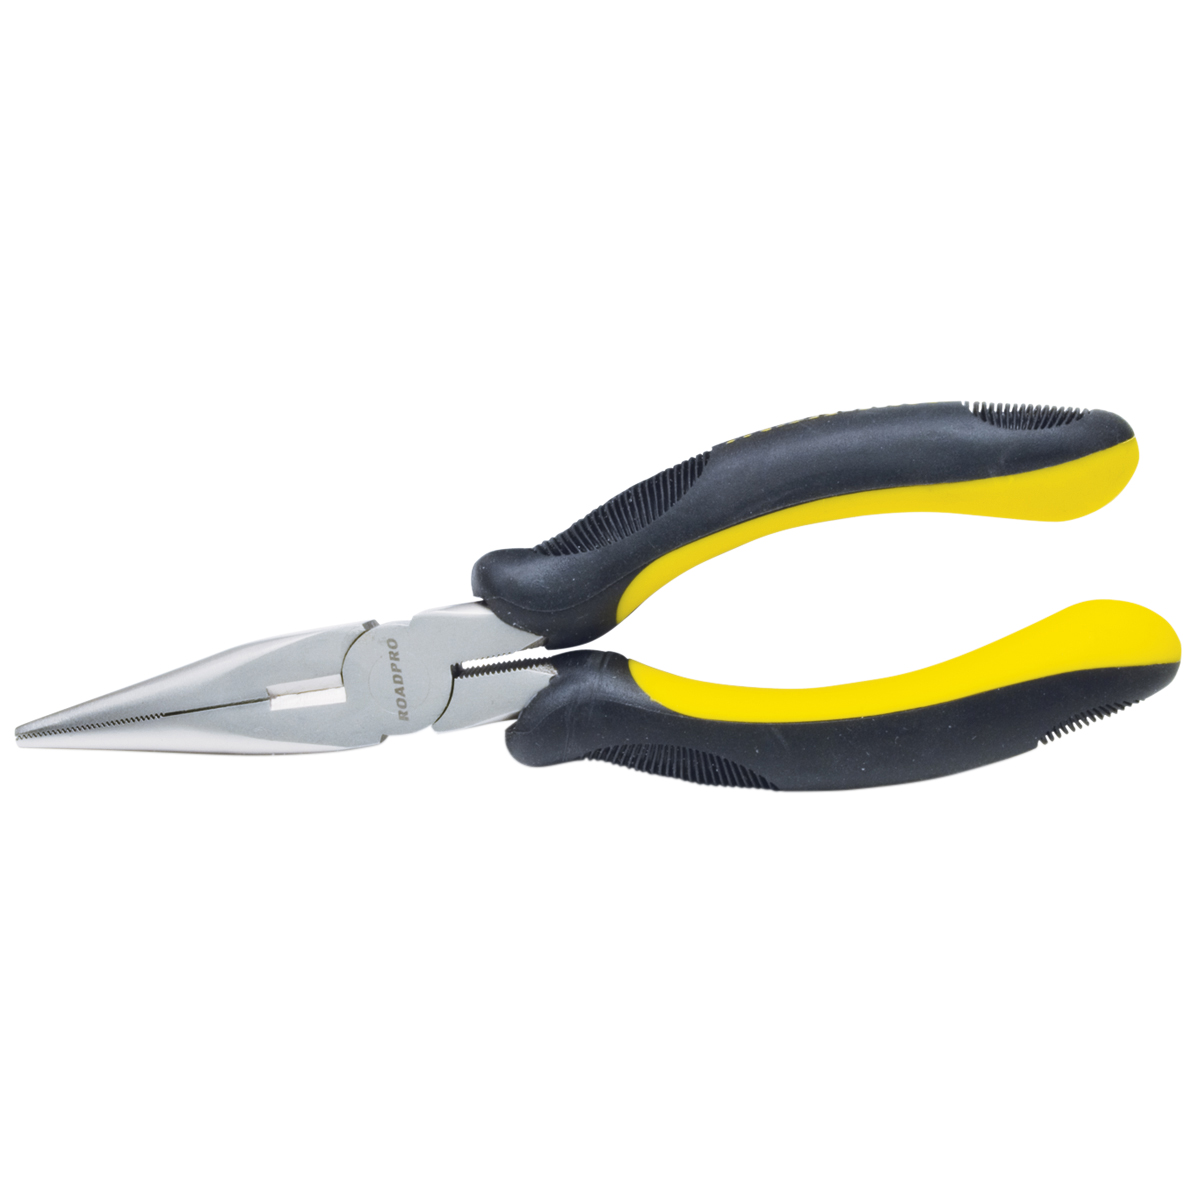 Pliers 6.5 in. Needle Nose